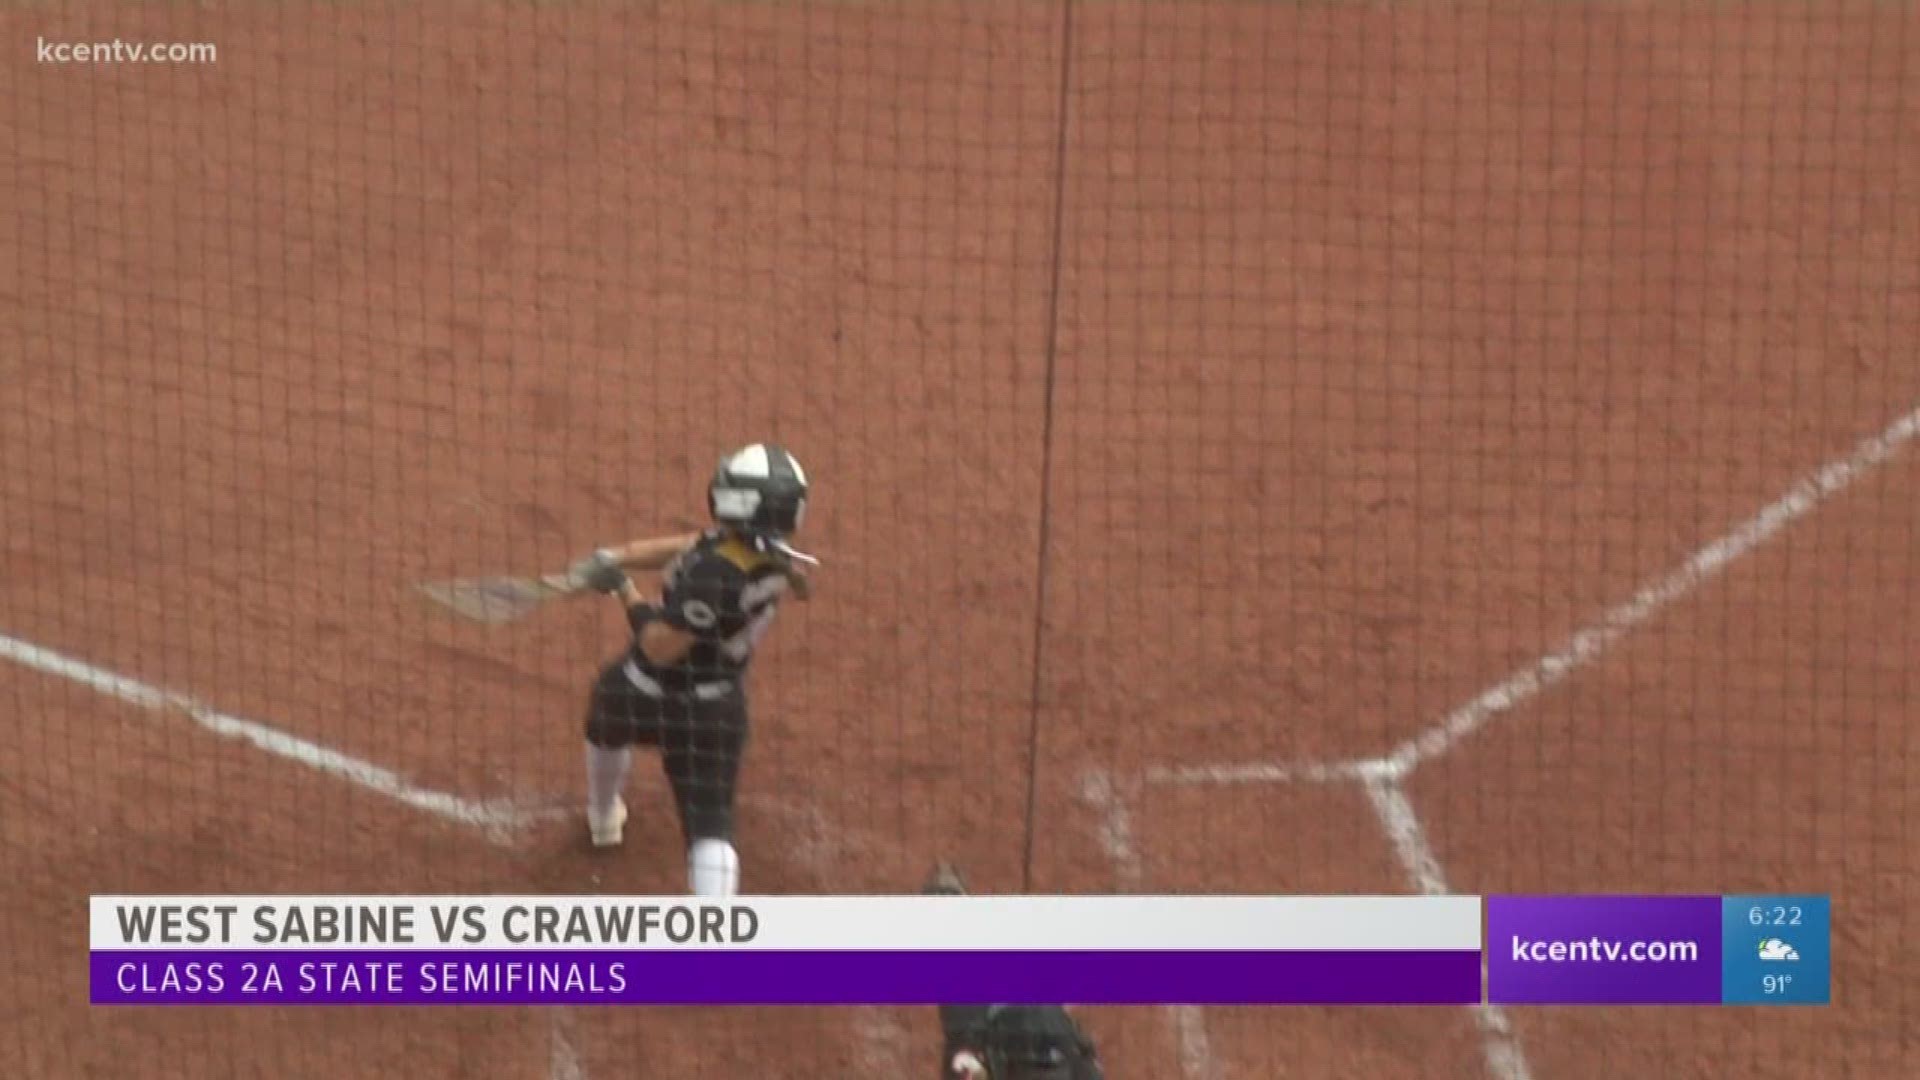 With a 6-5 win over West Sabine, Crawford softball advanced to the class 2A State Championship.